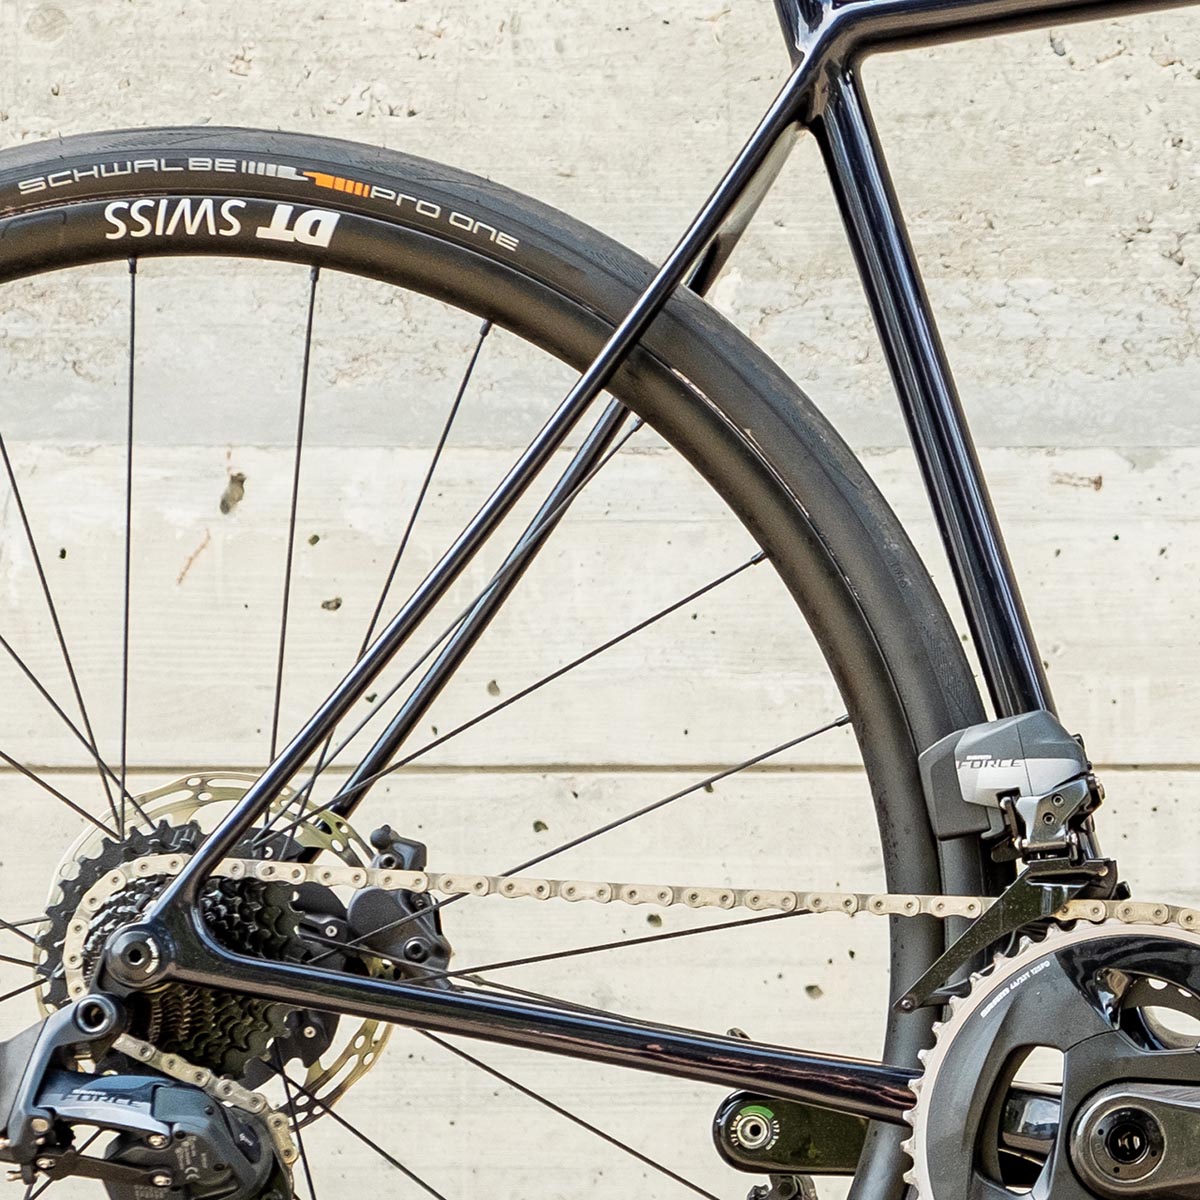 OPEN MIN.D allows for a new take on the classic road bike with Minimal Design